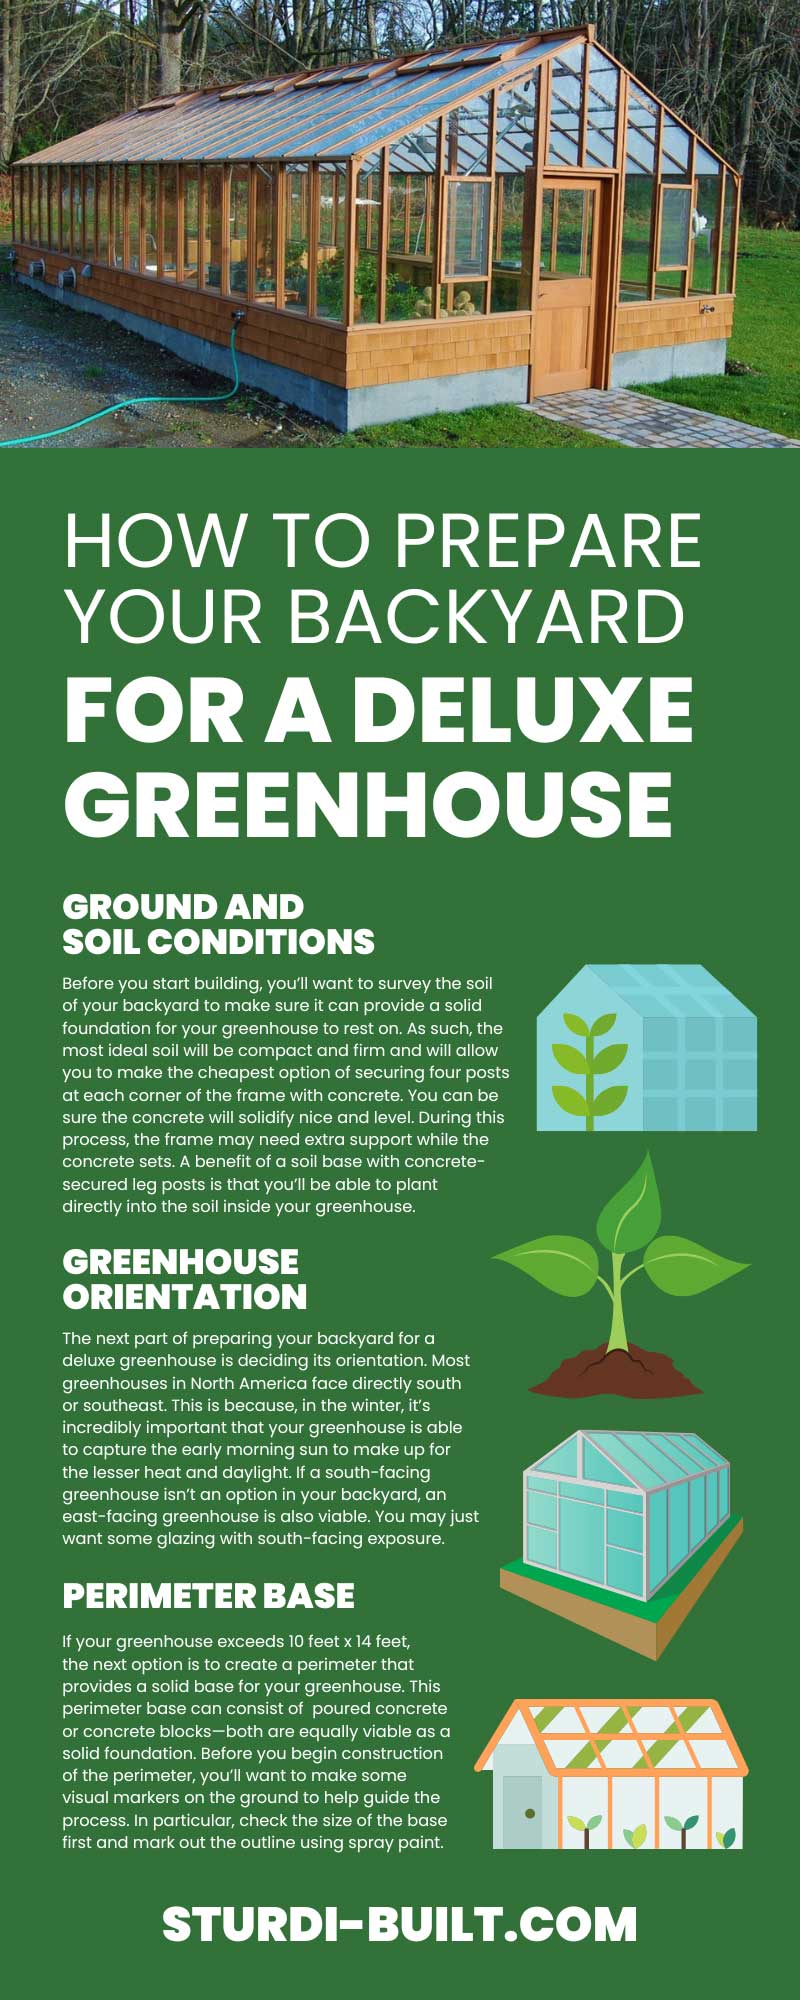 How To Prepare Your Backyard for a Deluxe Greenhouse 